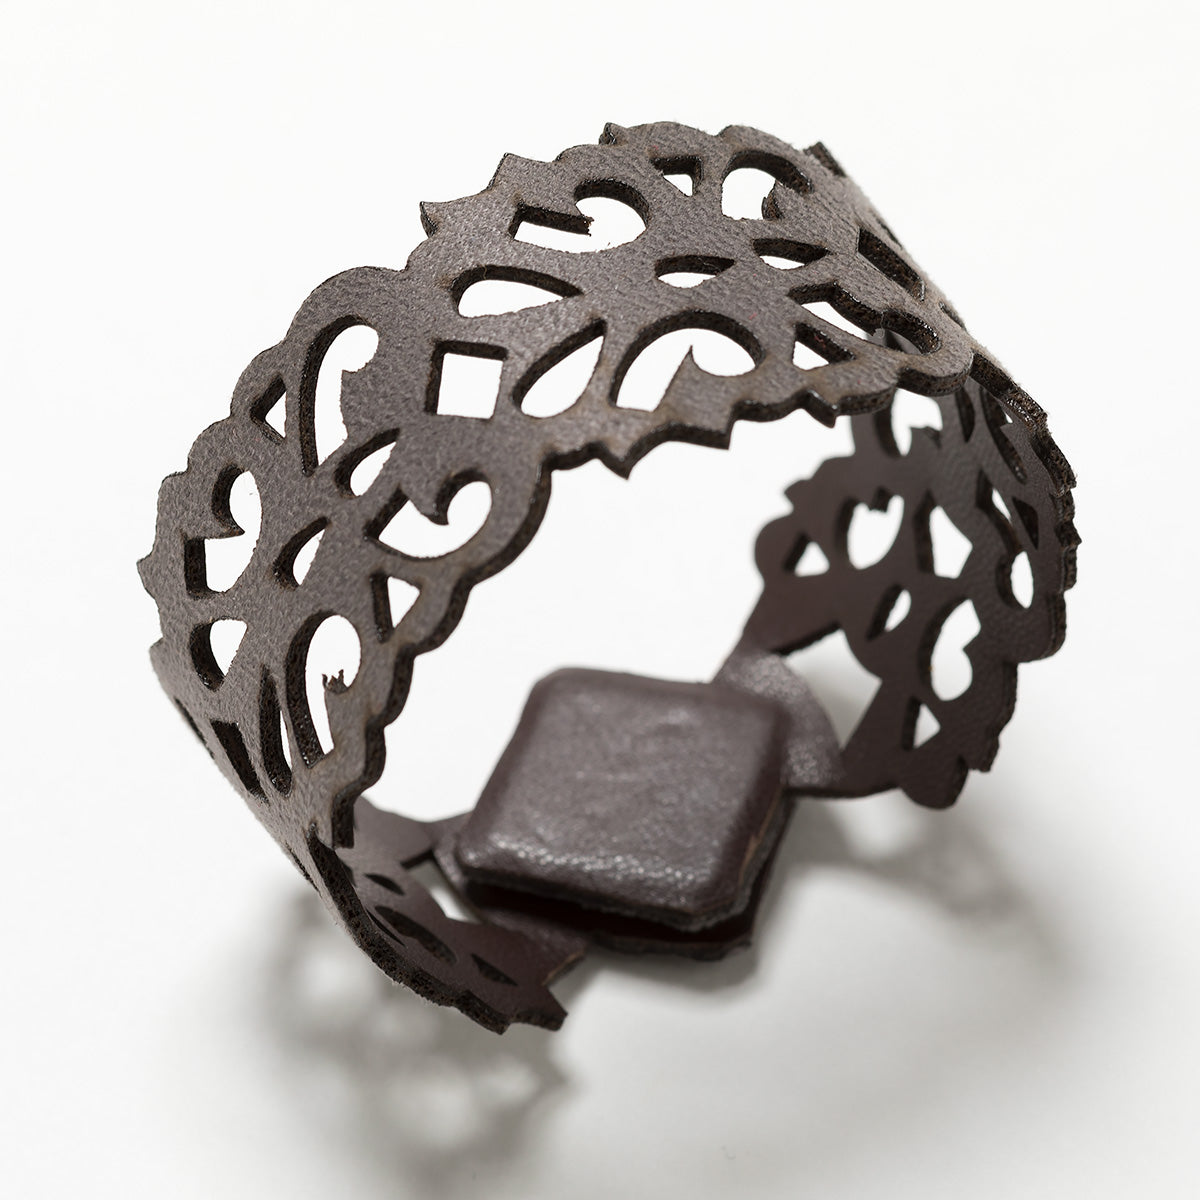 Lori Weitzner Terra laser cut reversible bracelet in suede and faux leather